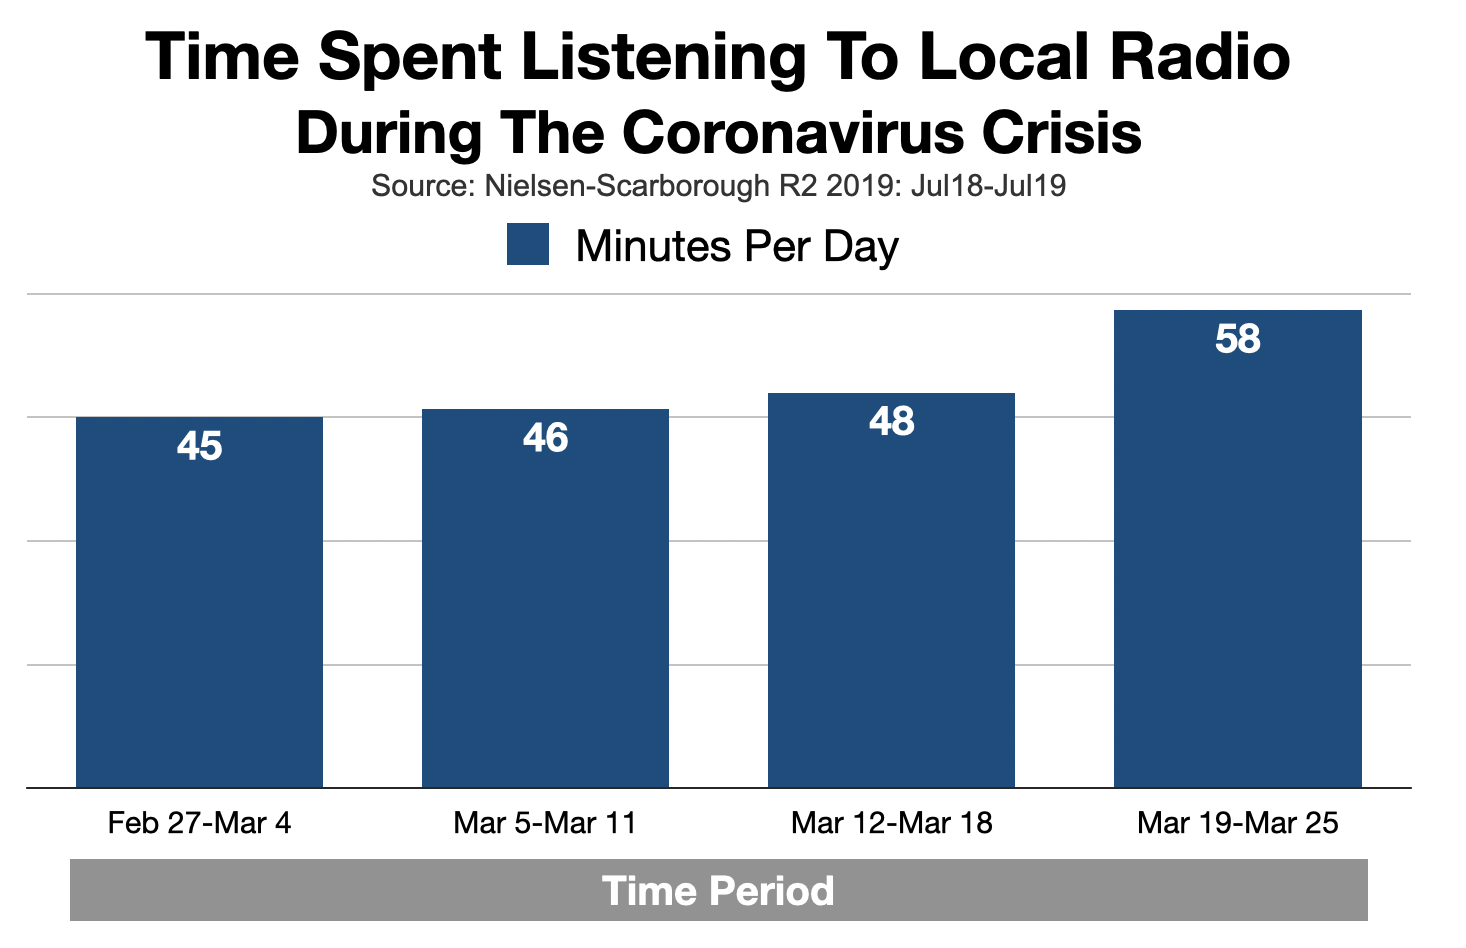 Advertise In Fayetteville: Time Spent Listening To Radio